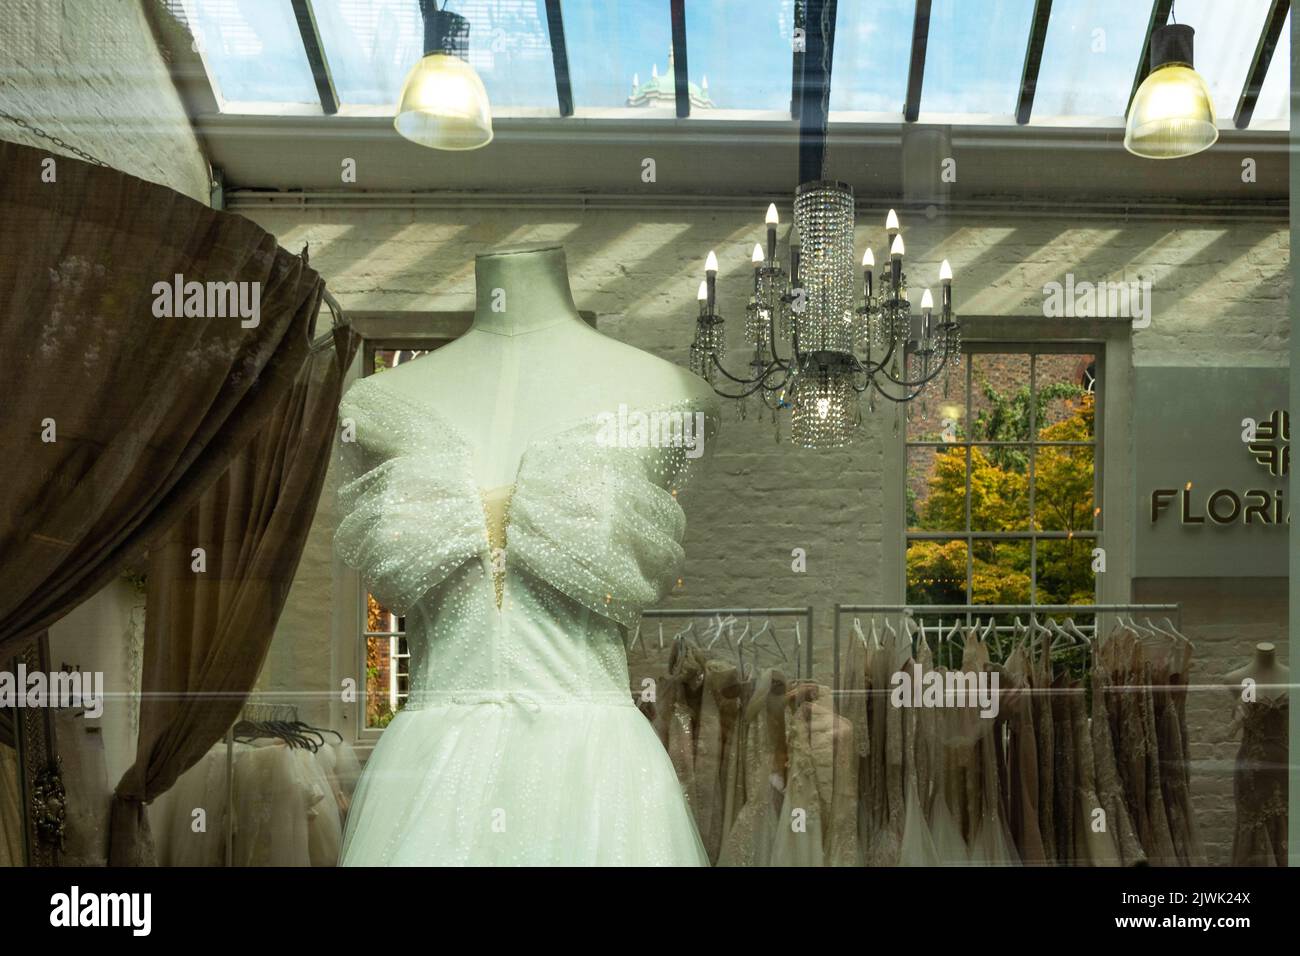 Looking in the window of Florianni Bridal Boutique in Liverpool Stock Photo